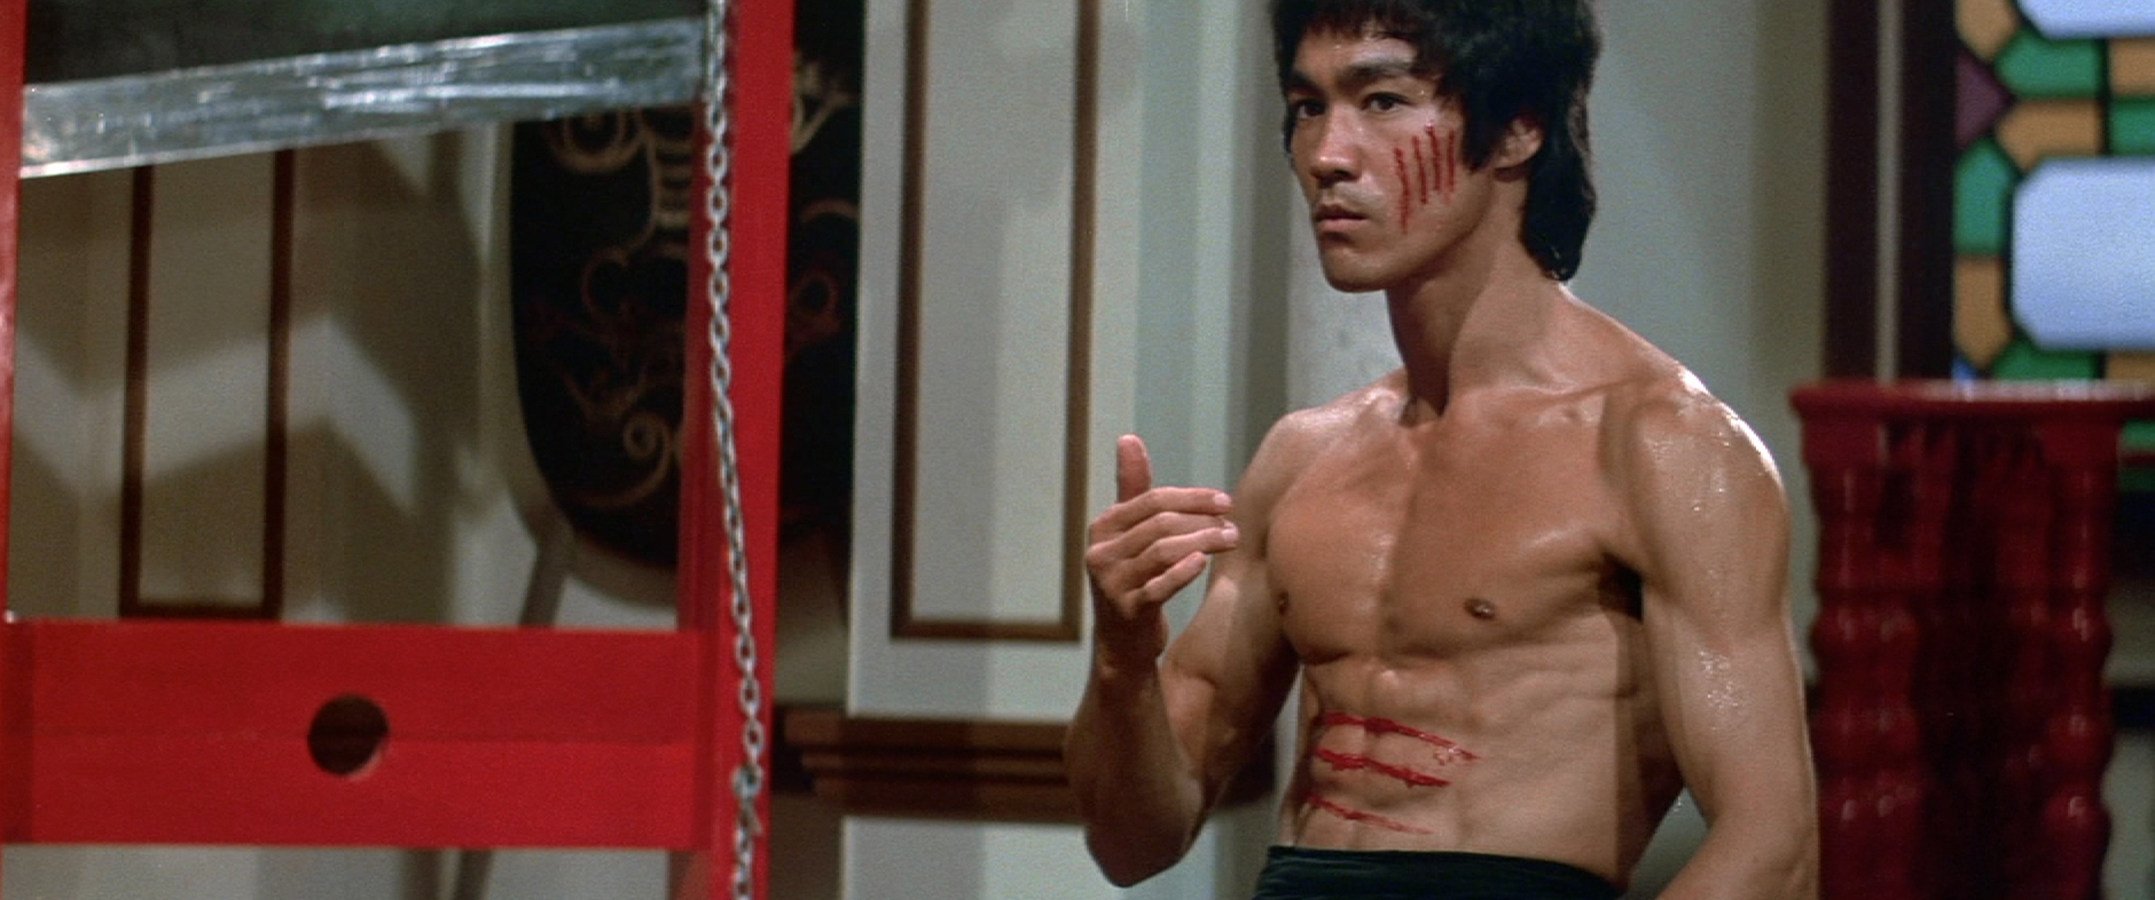 Bruce Lee in a still from “Enter the Dragon”, released a month after his death in 1973. The success of his films led producers to cash in by using lookalike actors. Photo: Criterion Collection